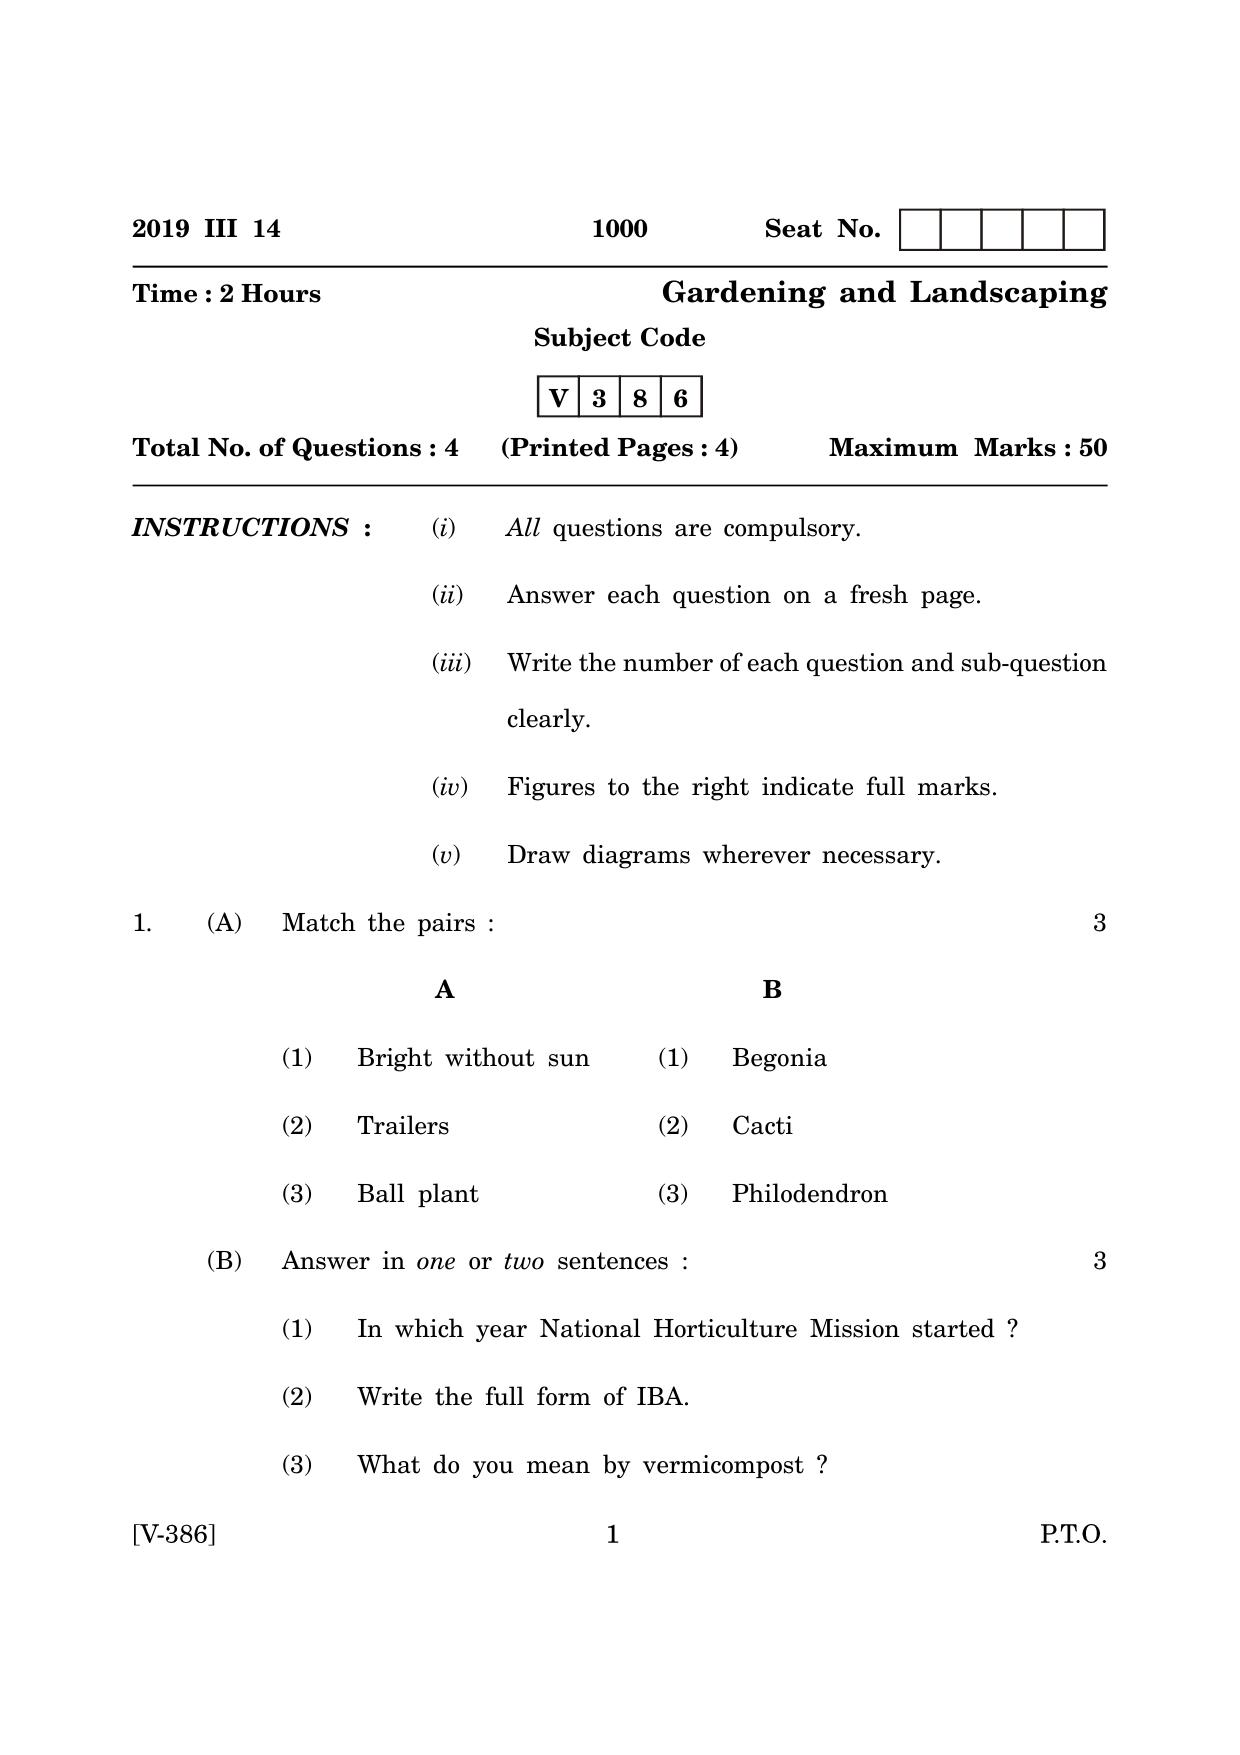 Goa Board Class 12 Gardening & Landscaping   (March 2019) Question Paper - Page 1